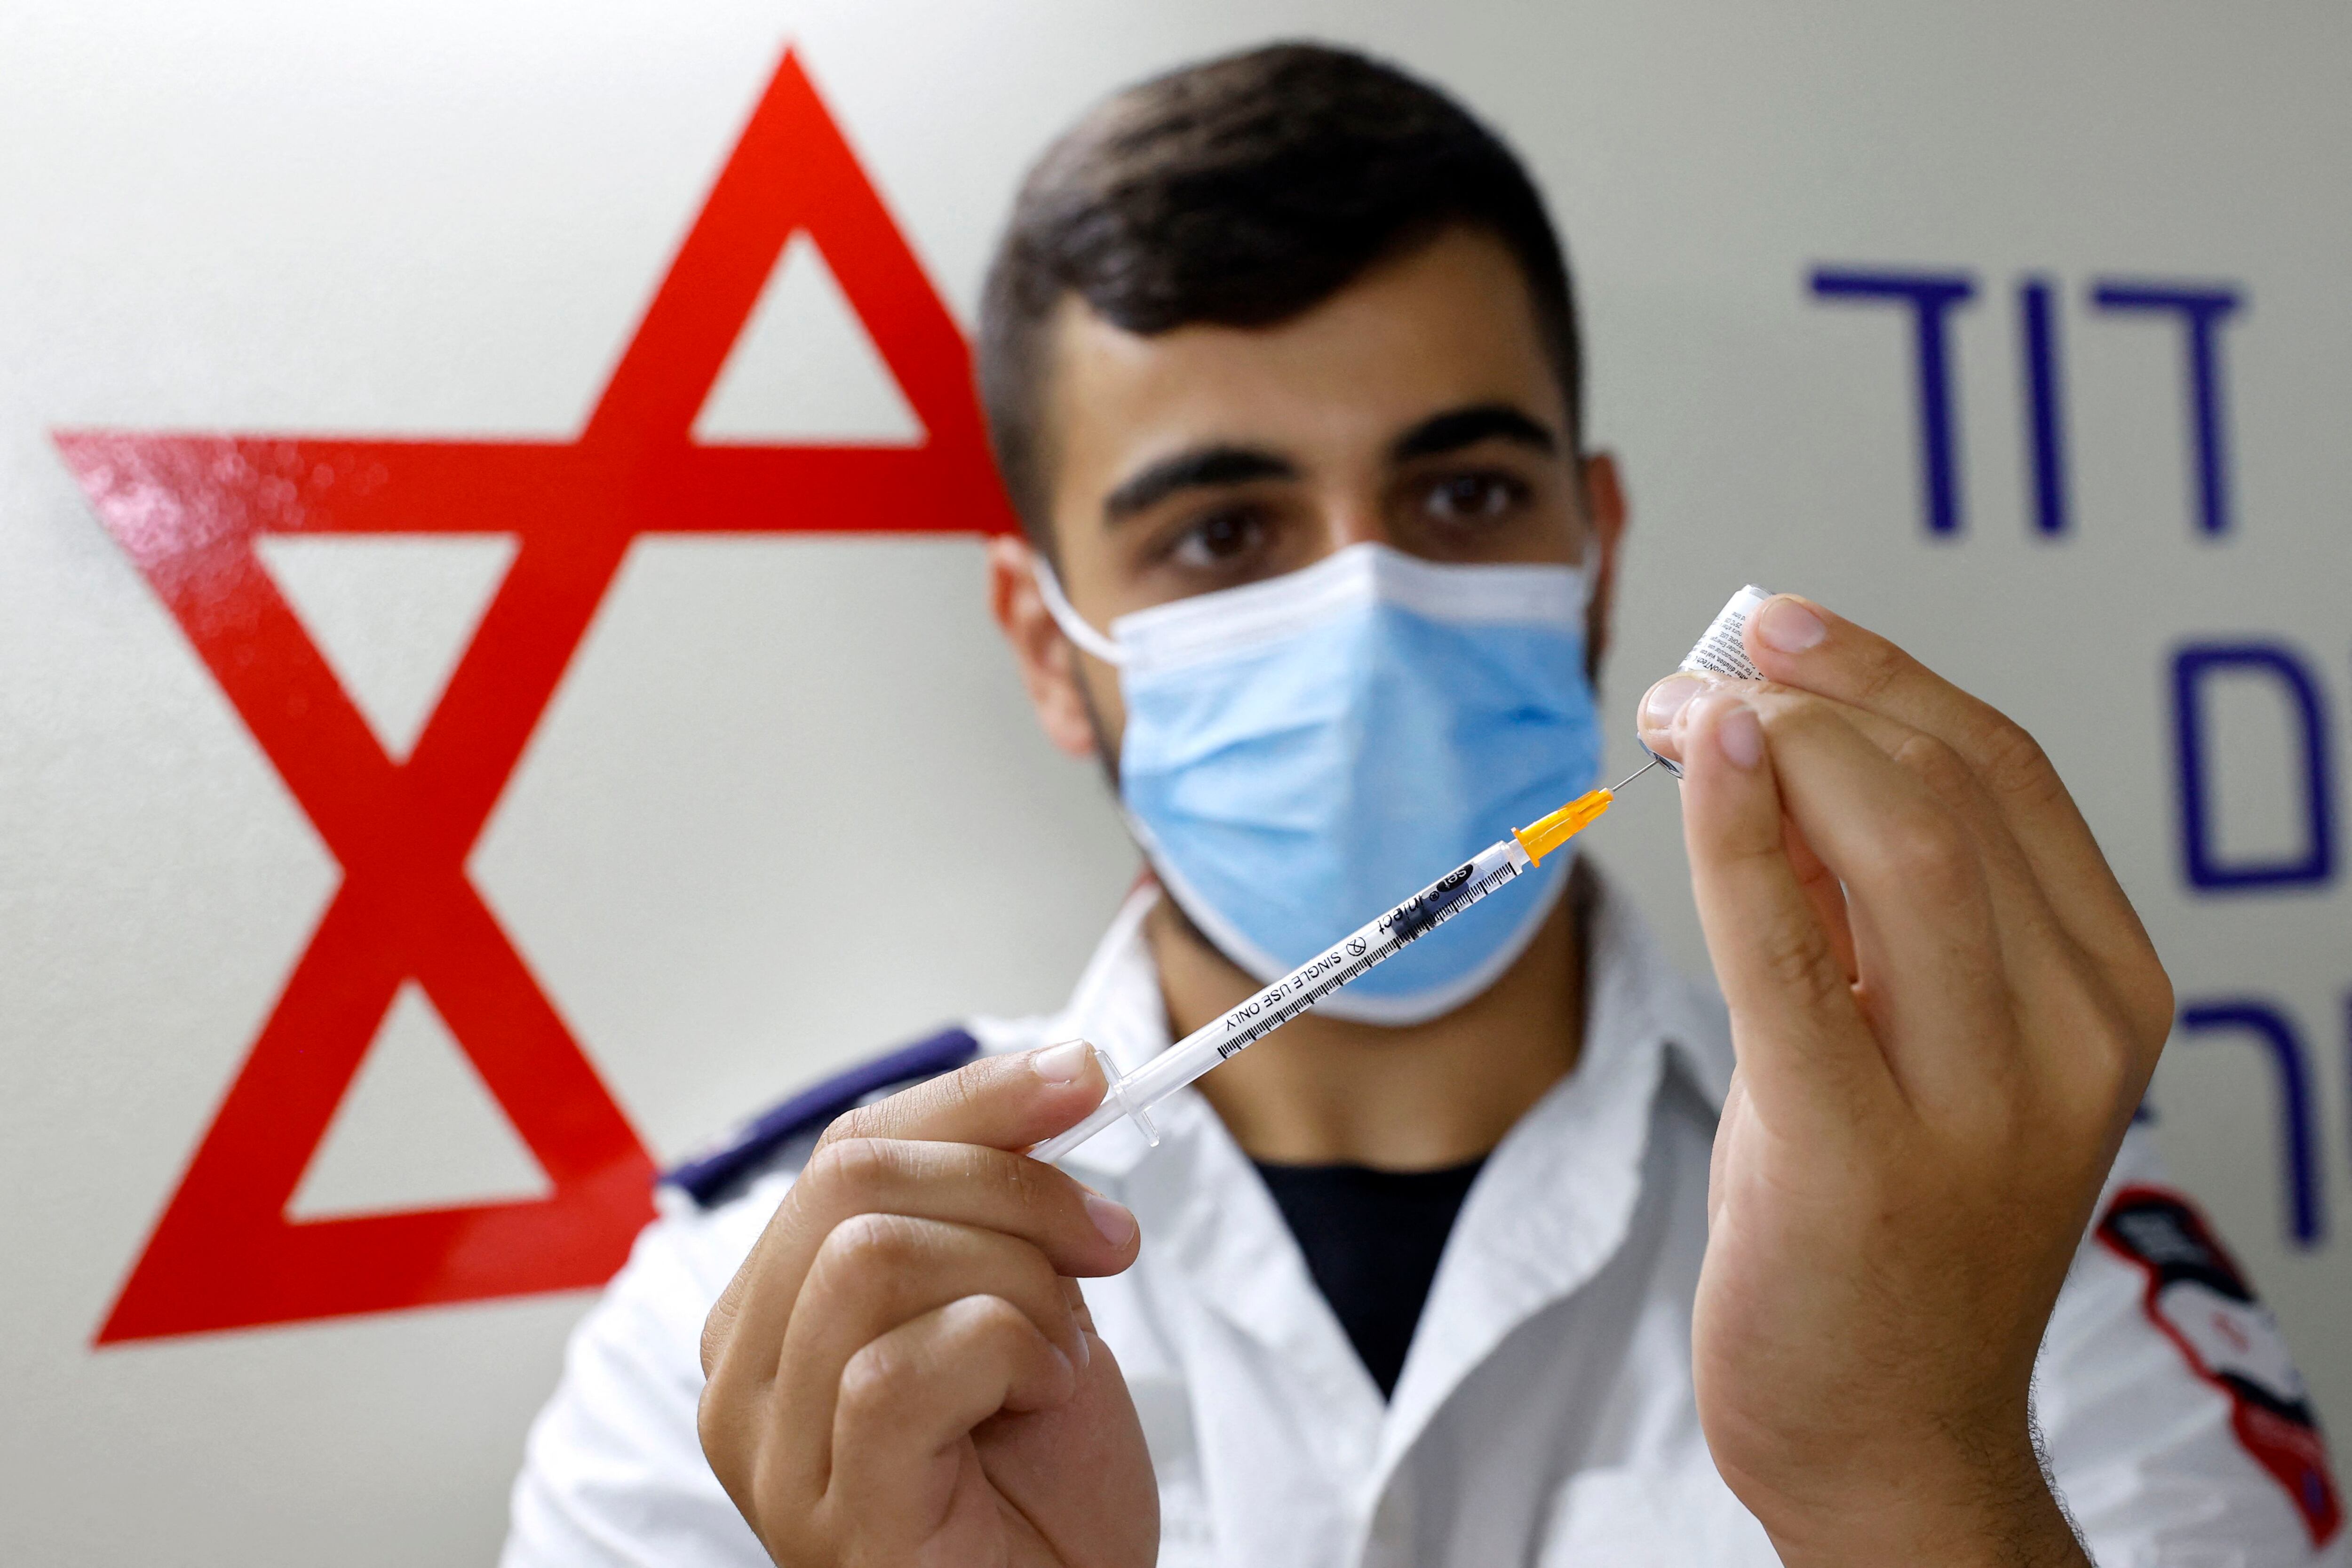 An Israeli medical worker prepares a dose of the COVID-19 vaccine during a campaign by the Tel Aviv City Council to encourage vaccination of adolescents.  (Photo: AFP)